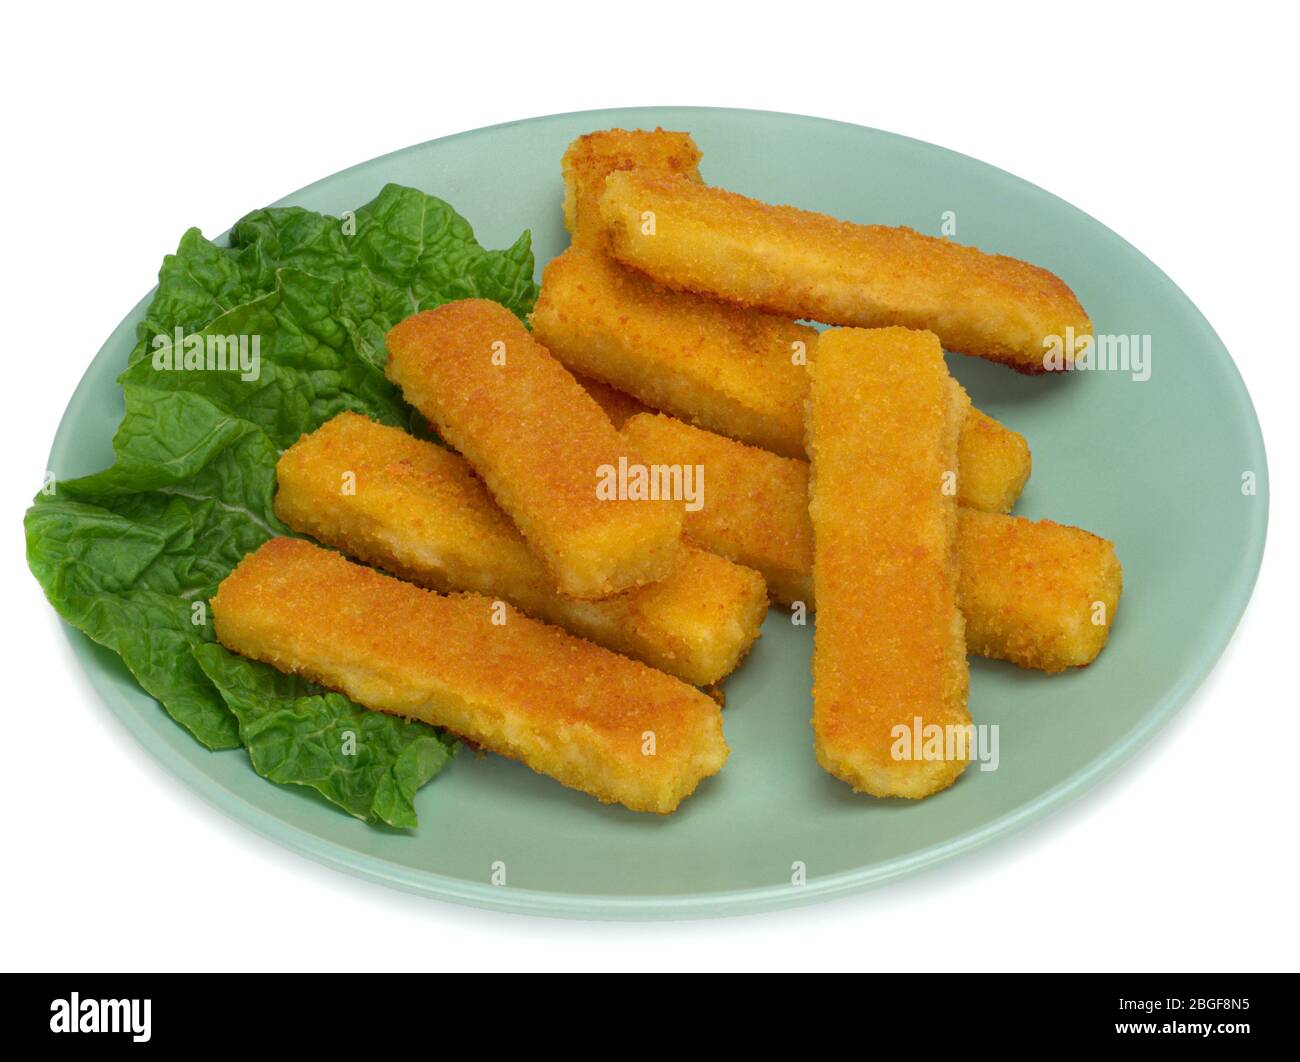 Fish fingers made of fish fillet in a plate Stock Photo